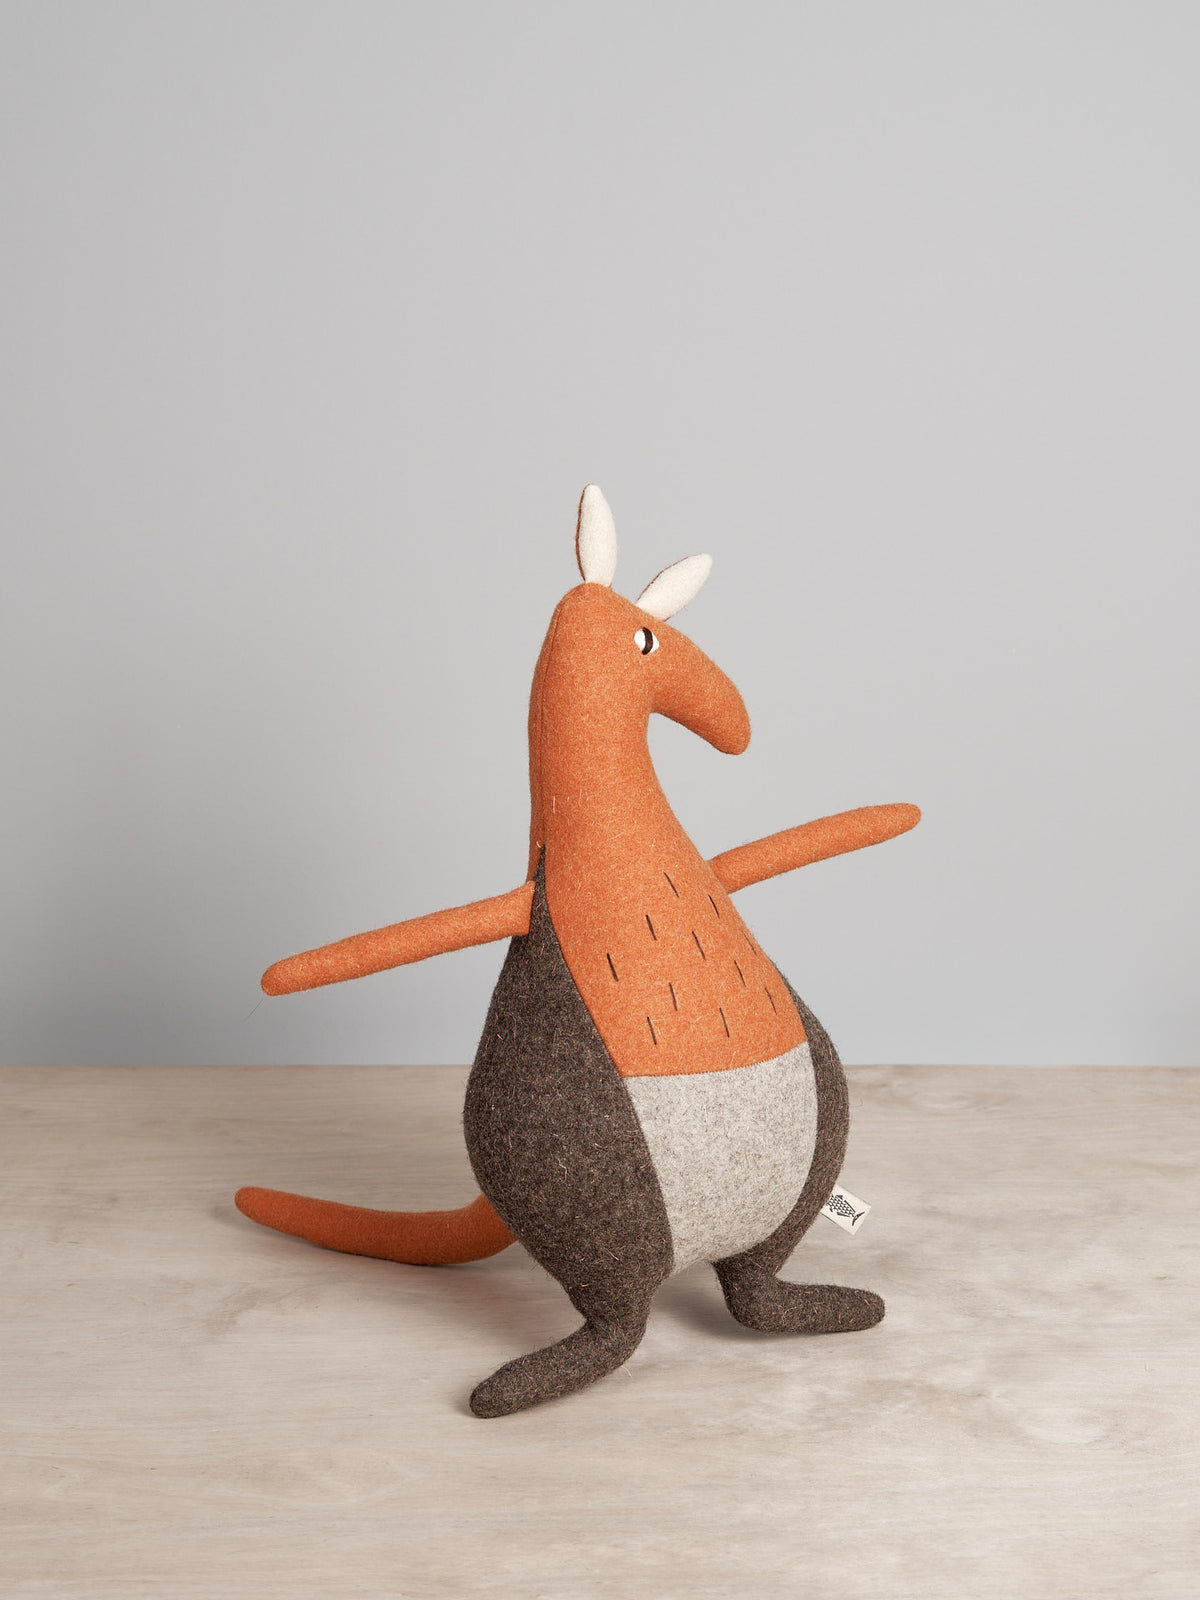 A JOE, the Kangaroo toy is sitting on a wooden table.